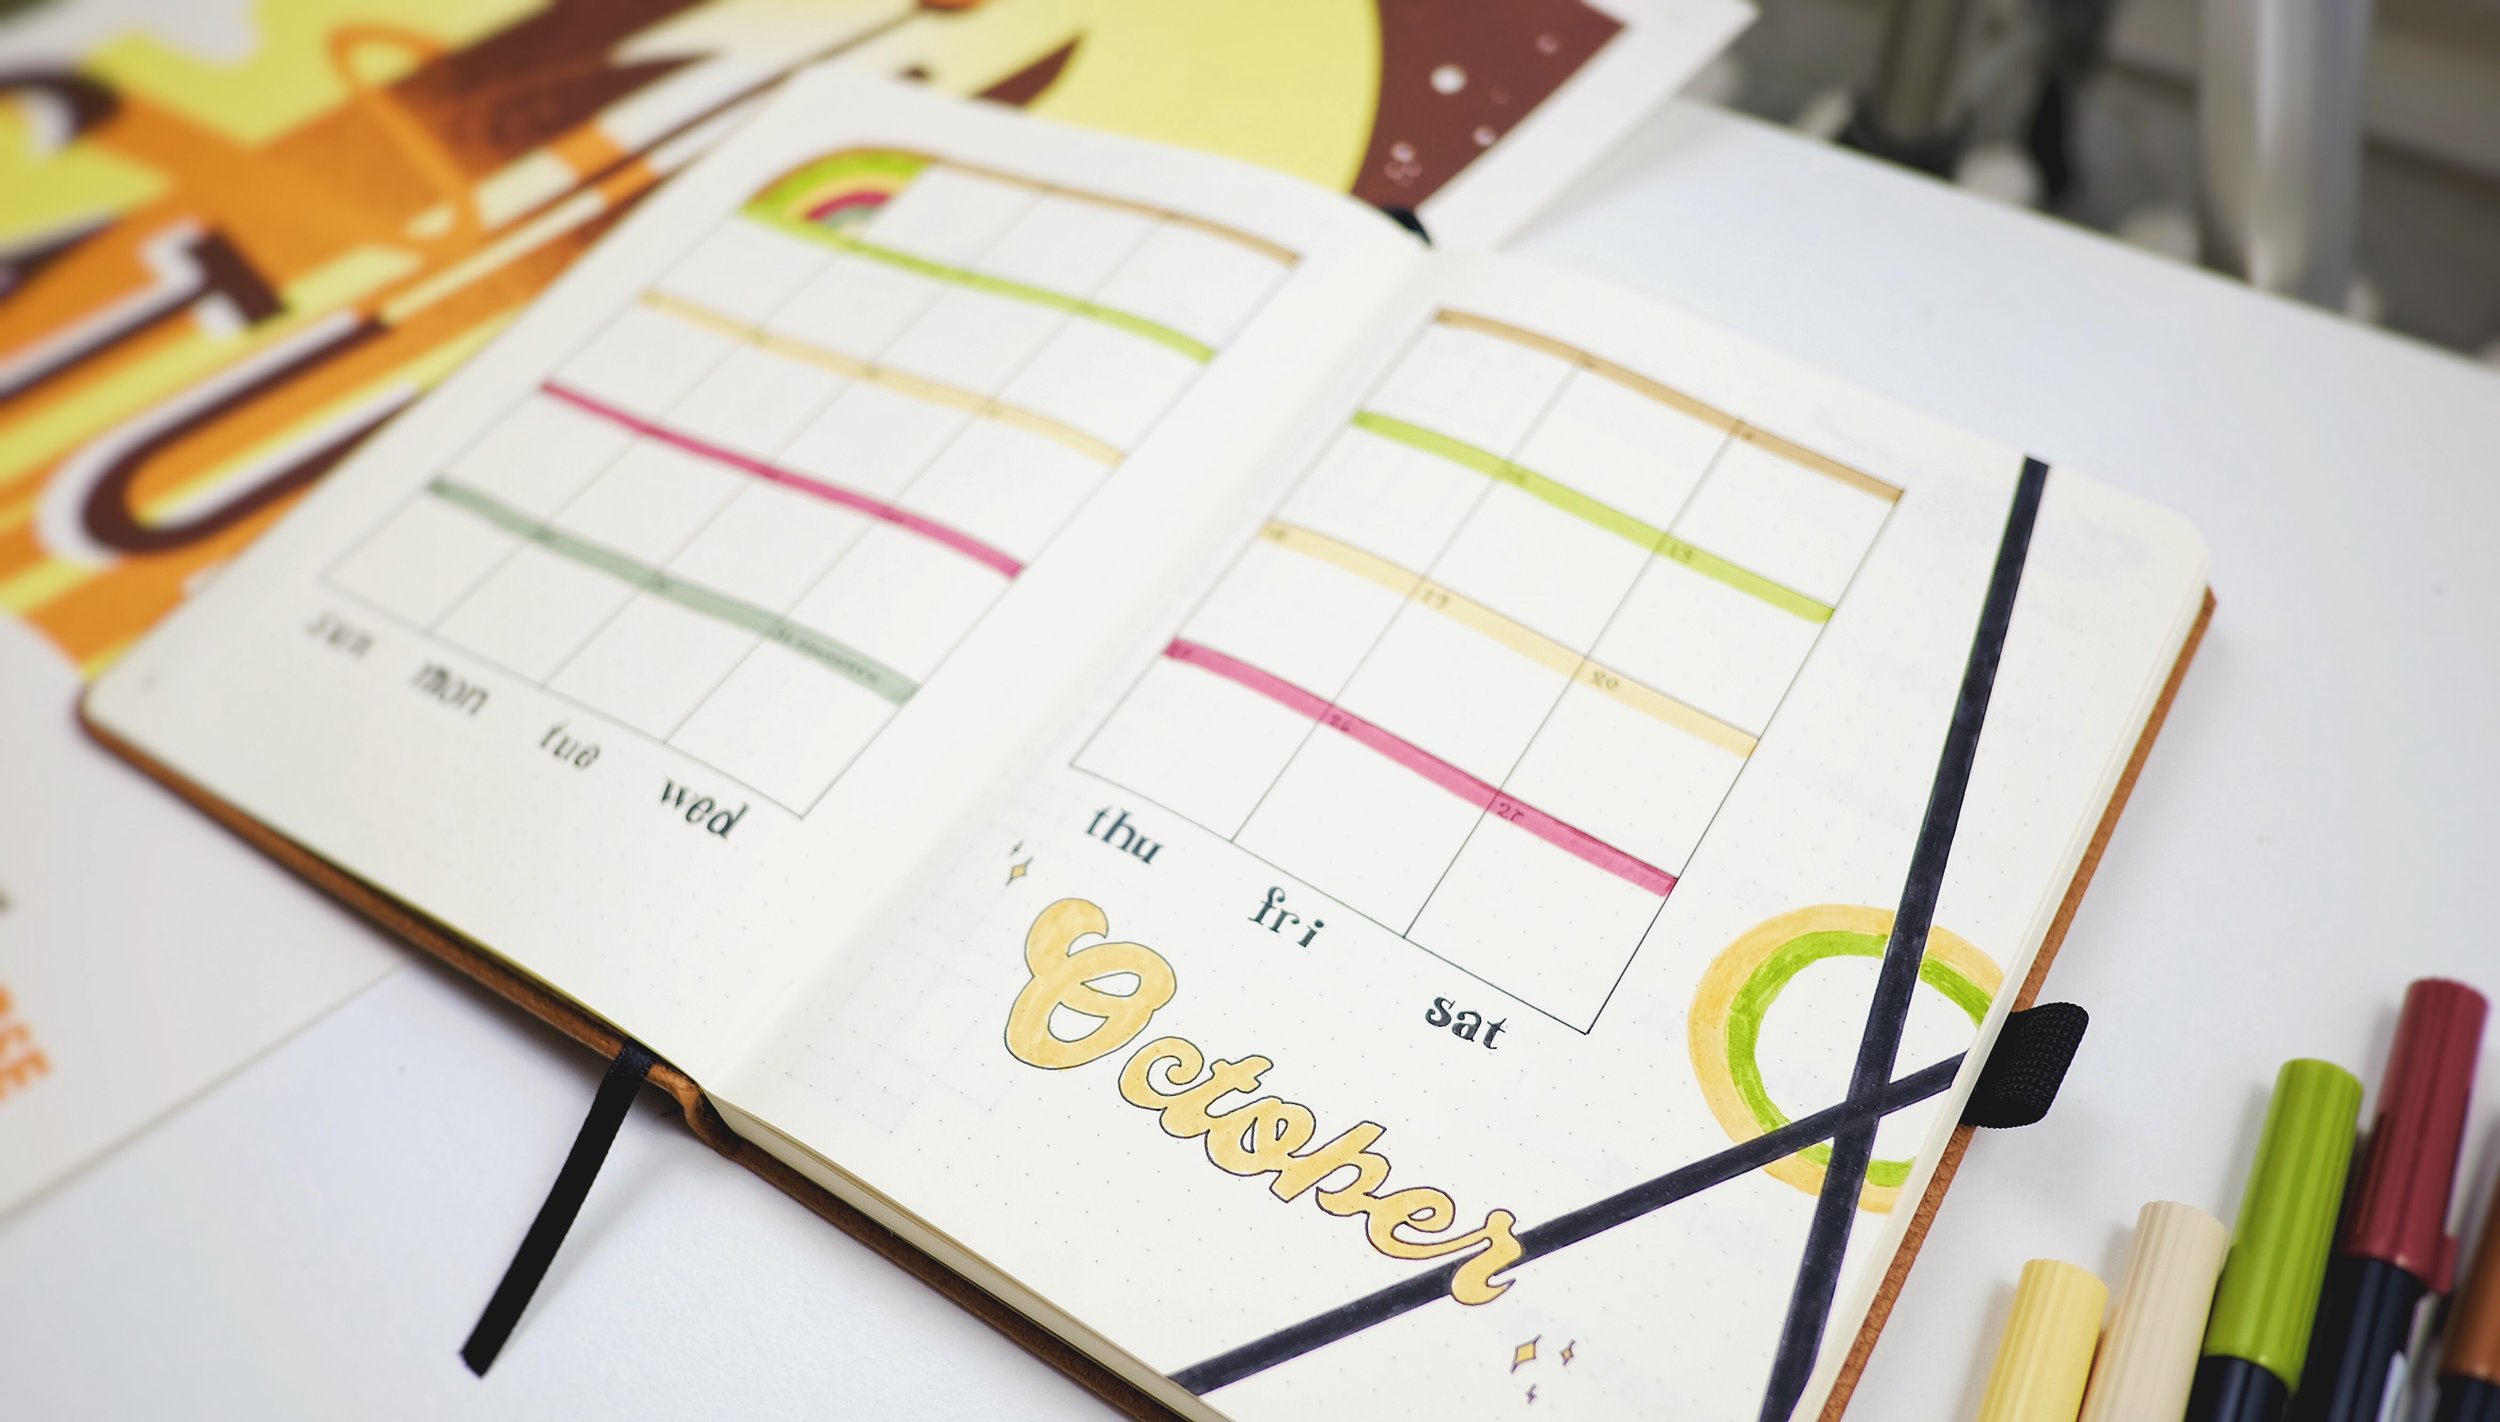 Wild Interiors — DIY: Bullet Journal Spreads for Plant Enthusiasts